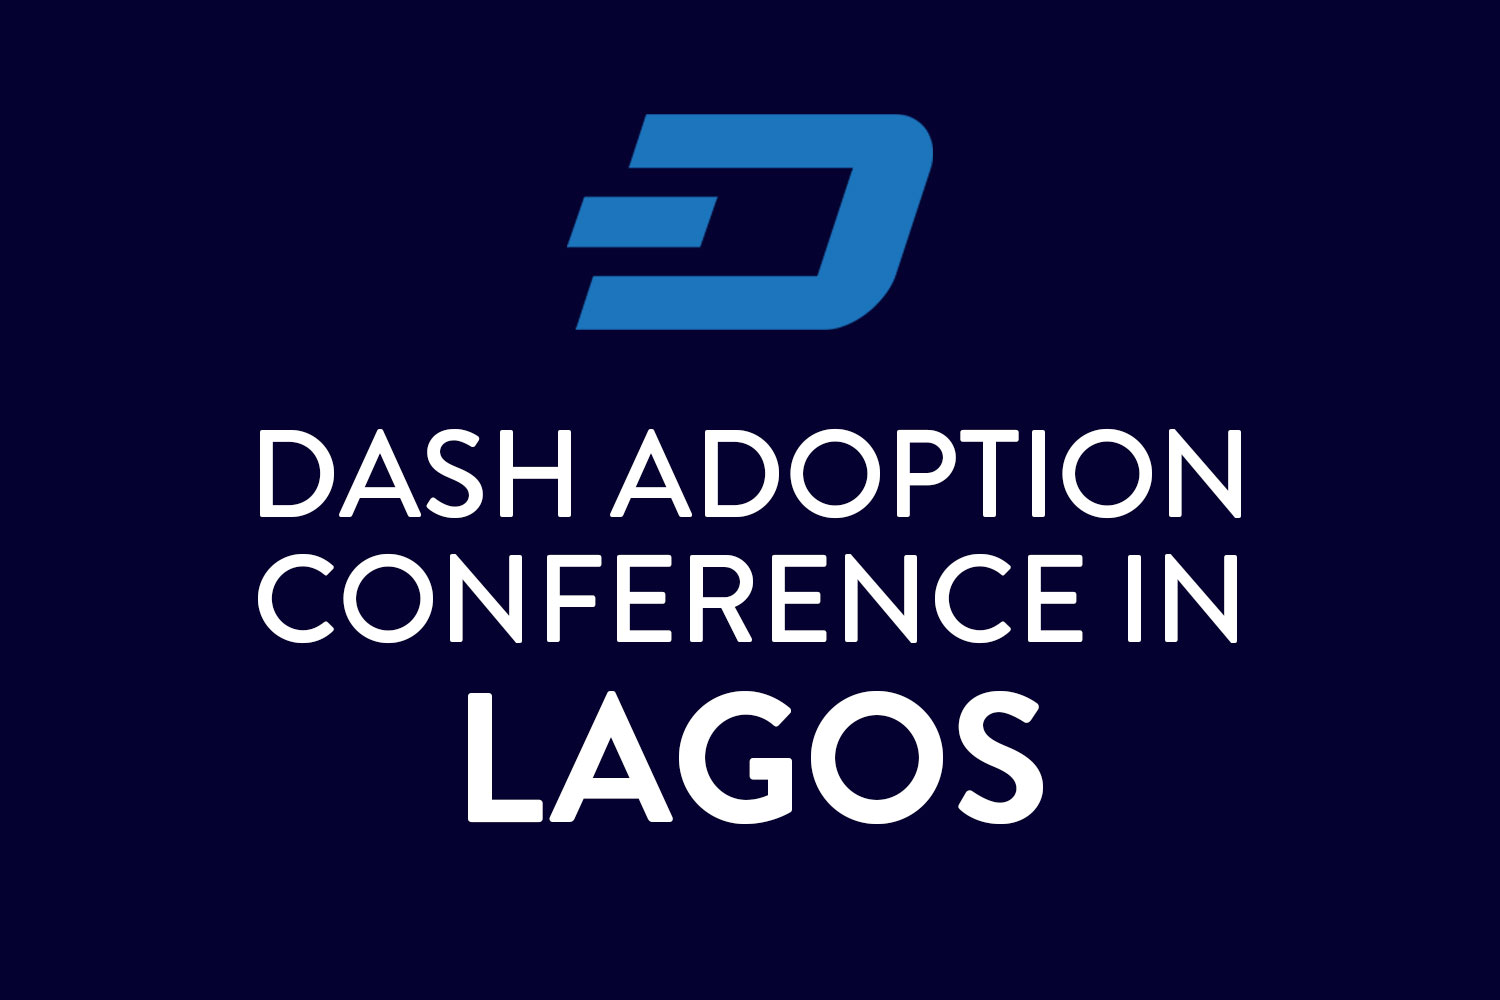 Promoting the Adoption and Use of Dash in Nigeria